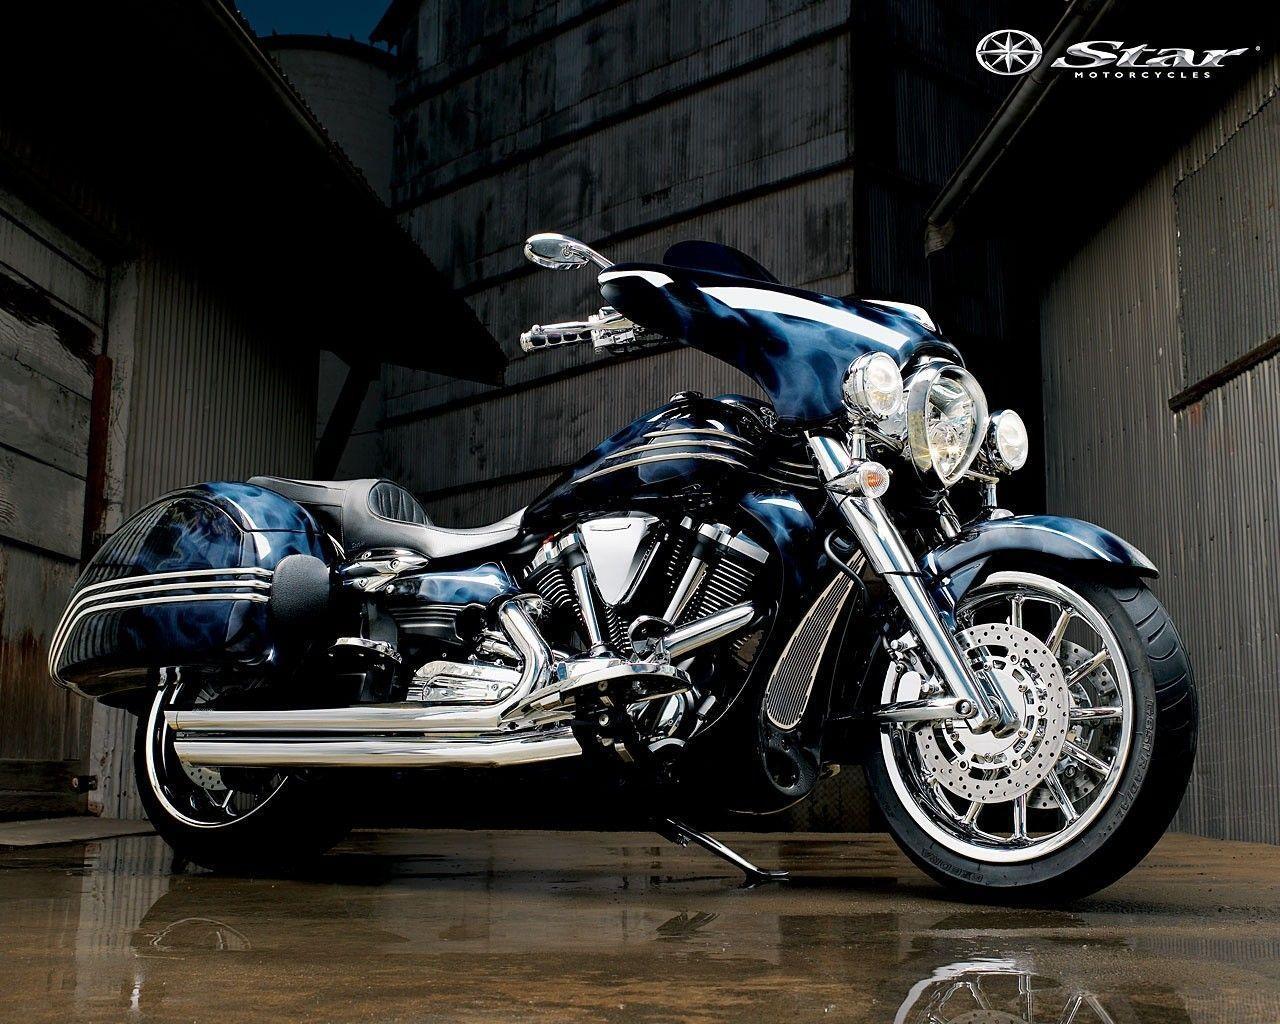 Cool Motorcycles Wallpaper HD Picture 4 HD Wallpaper. isghd